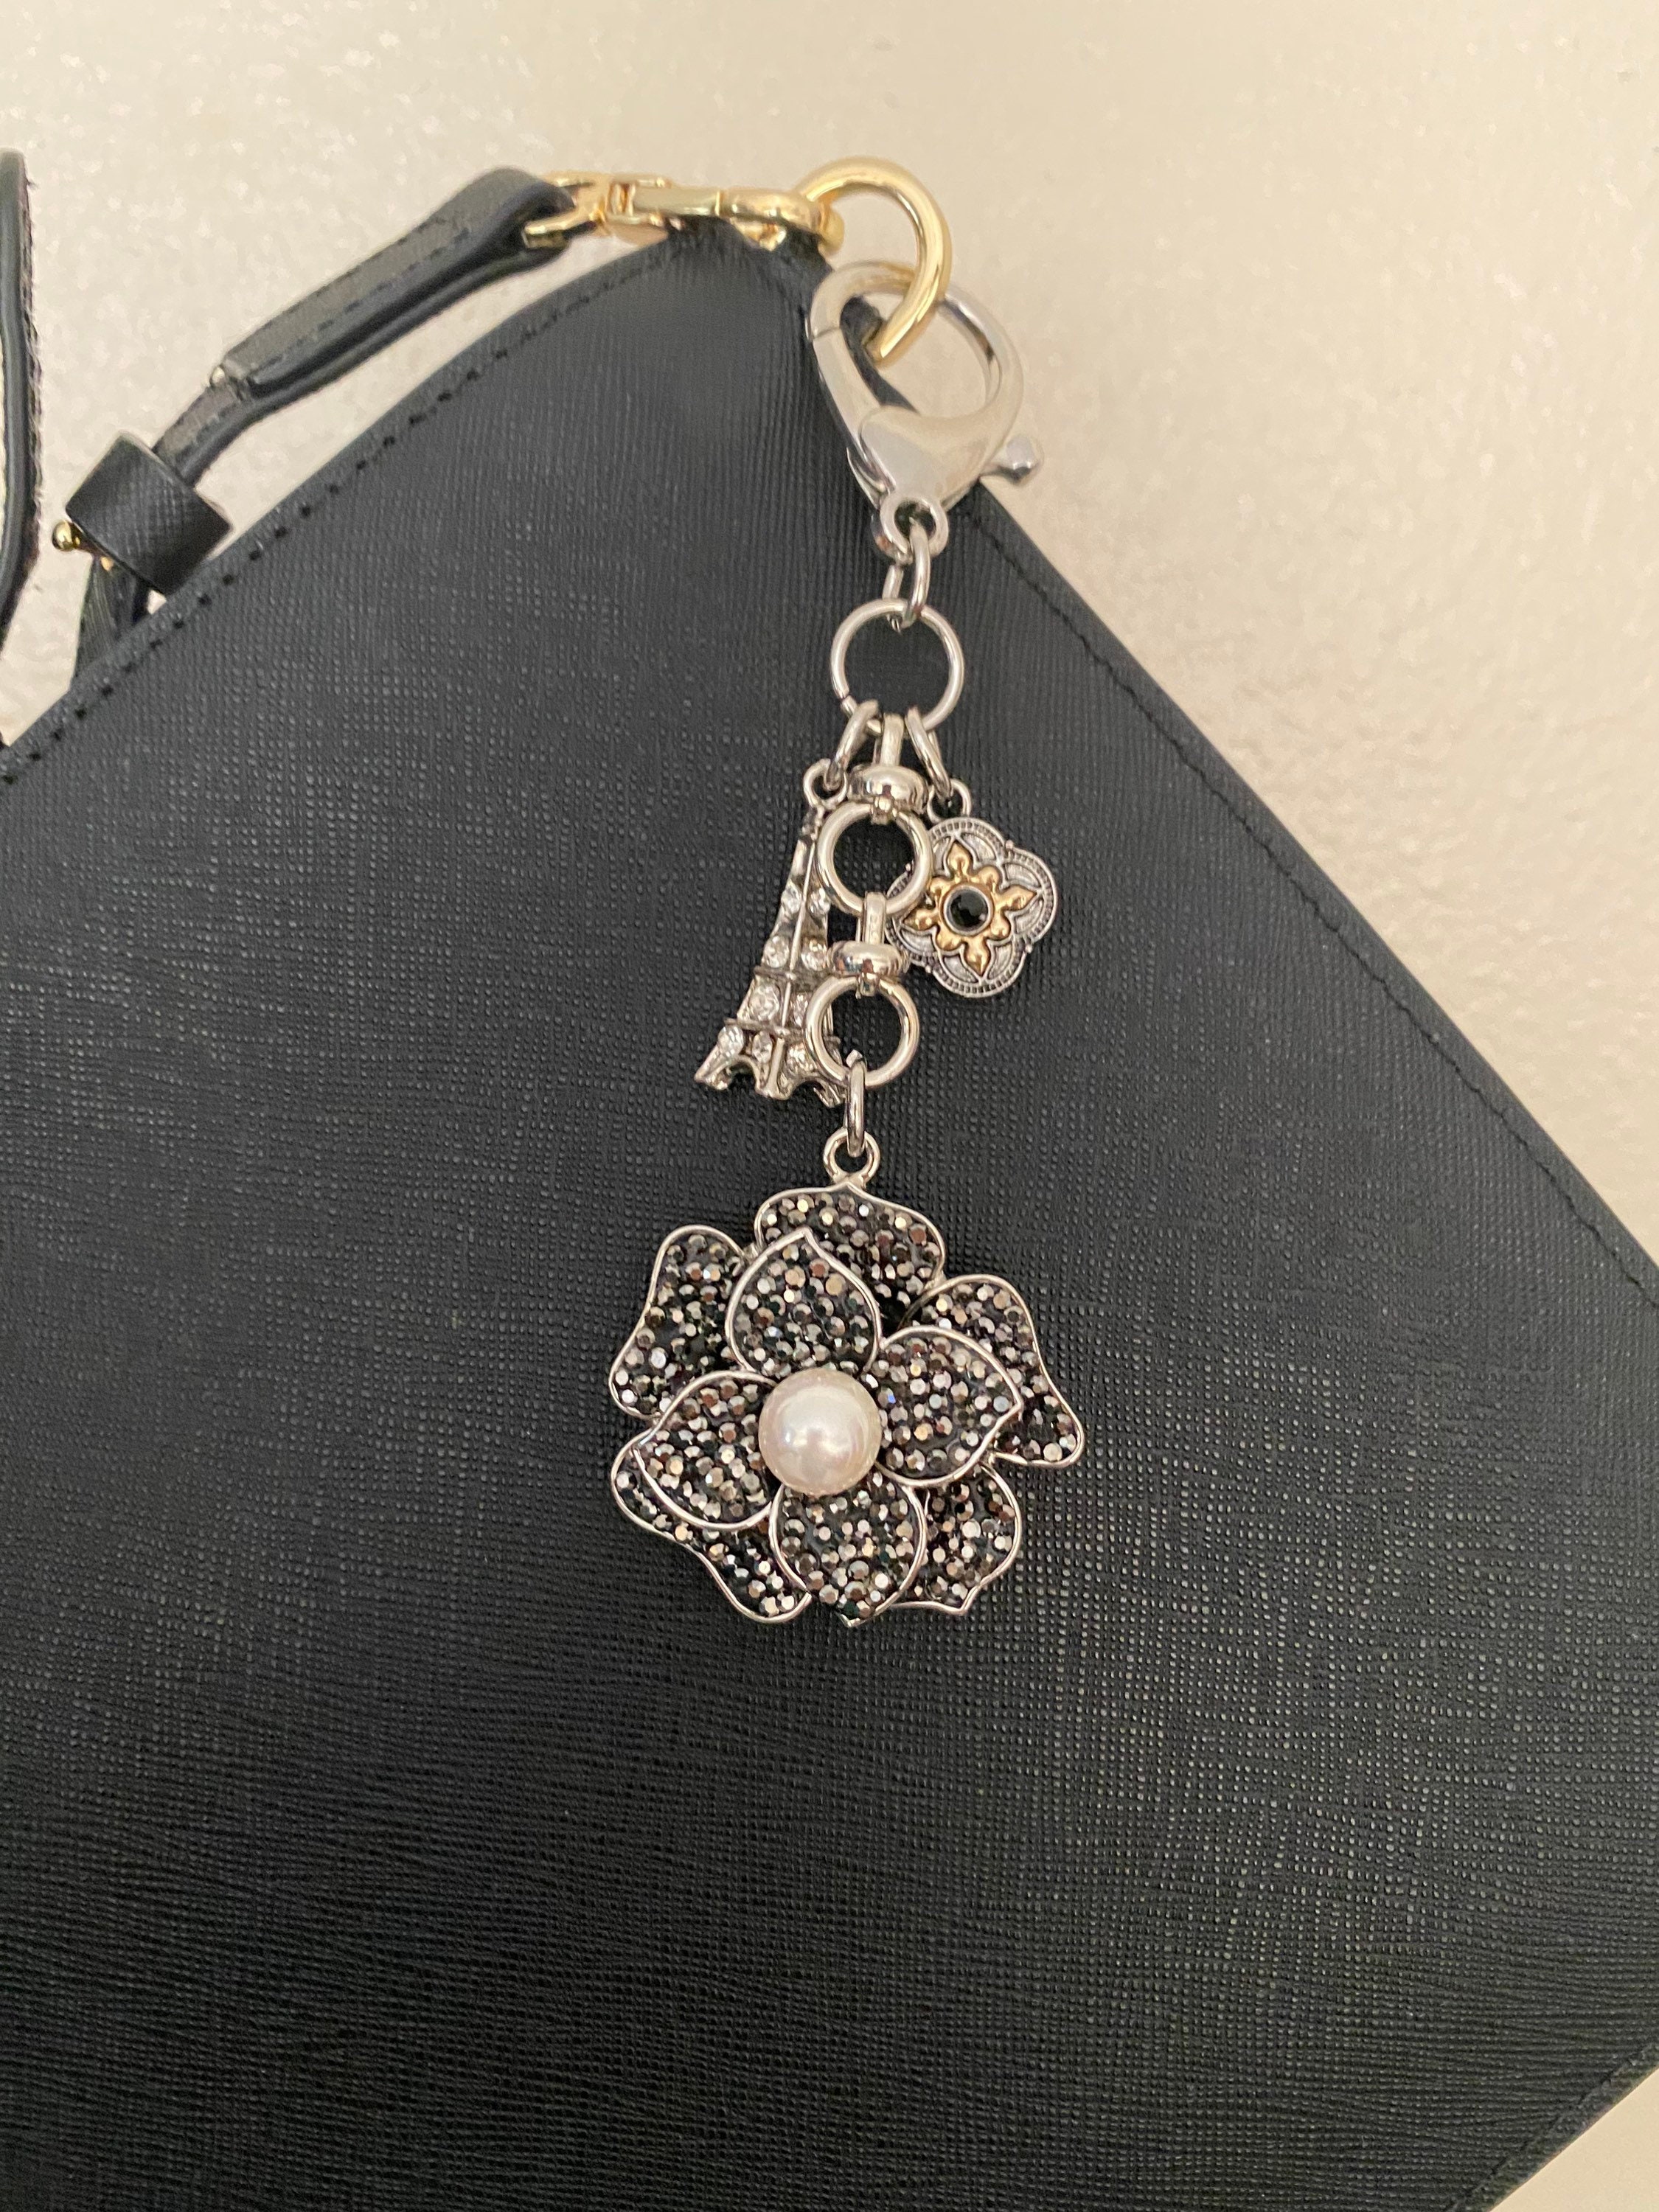 Buy Chanel Purse Charm Online In India -  India